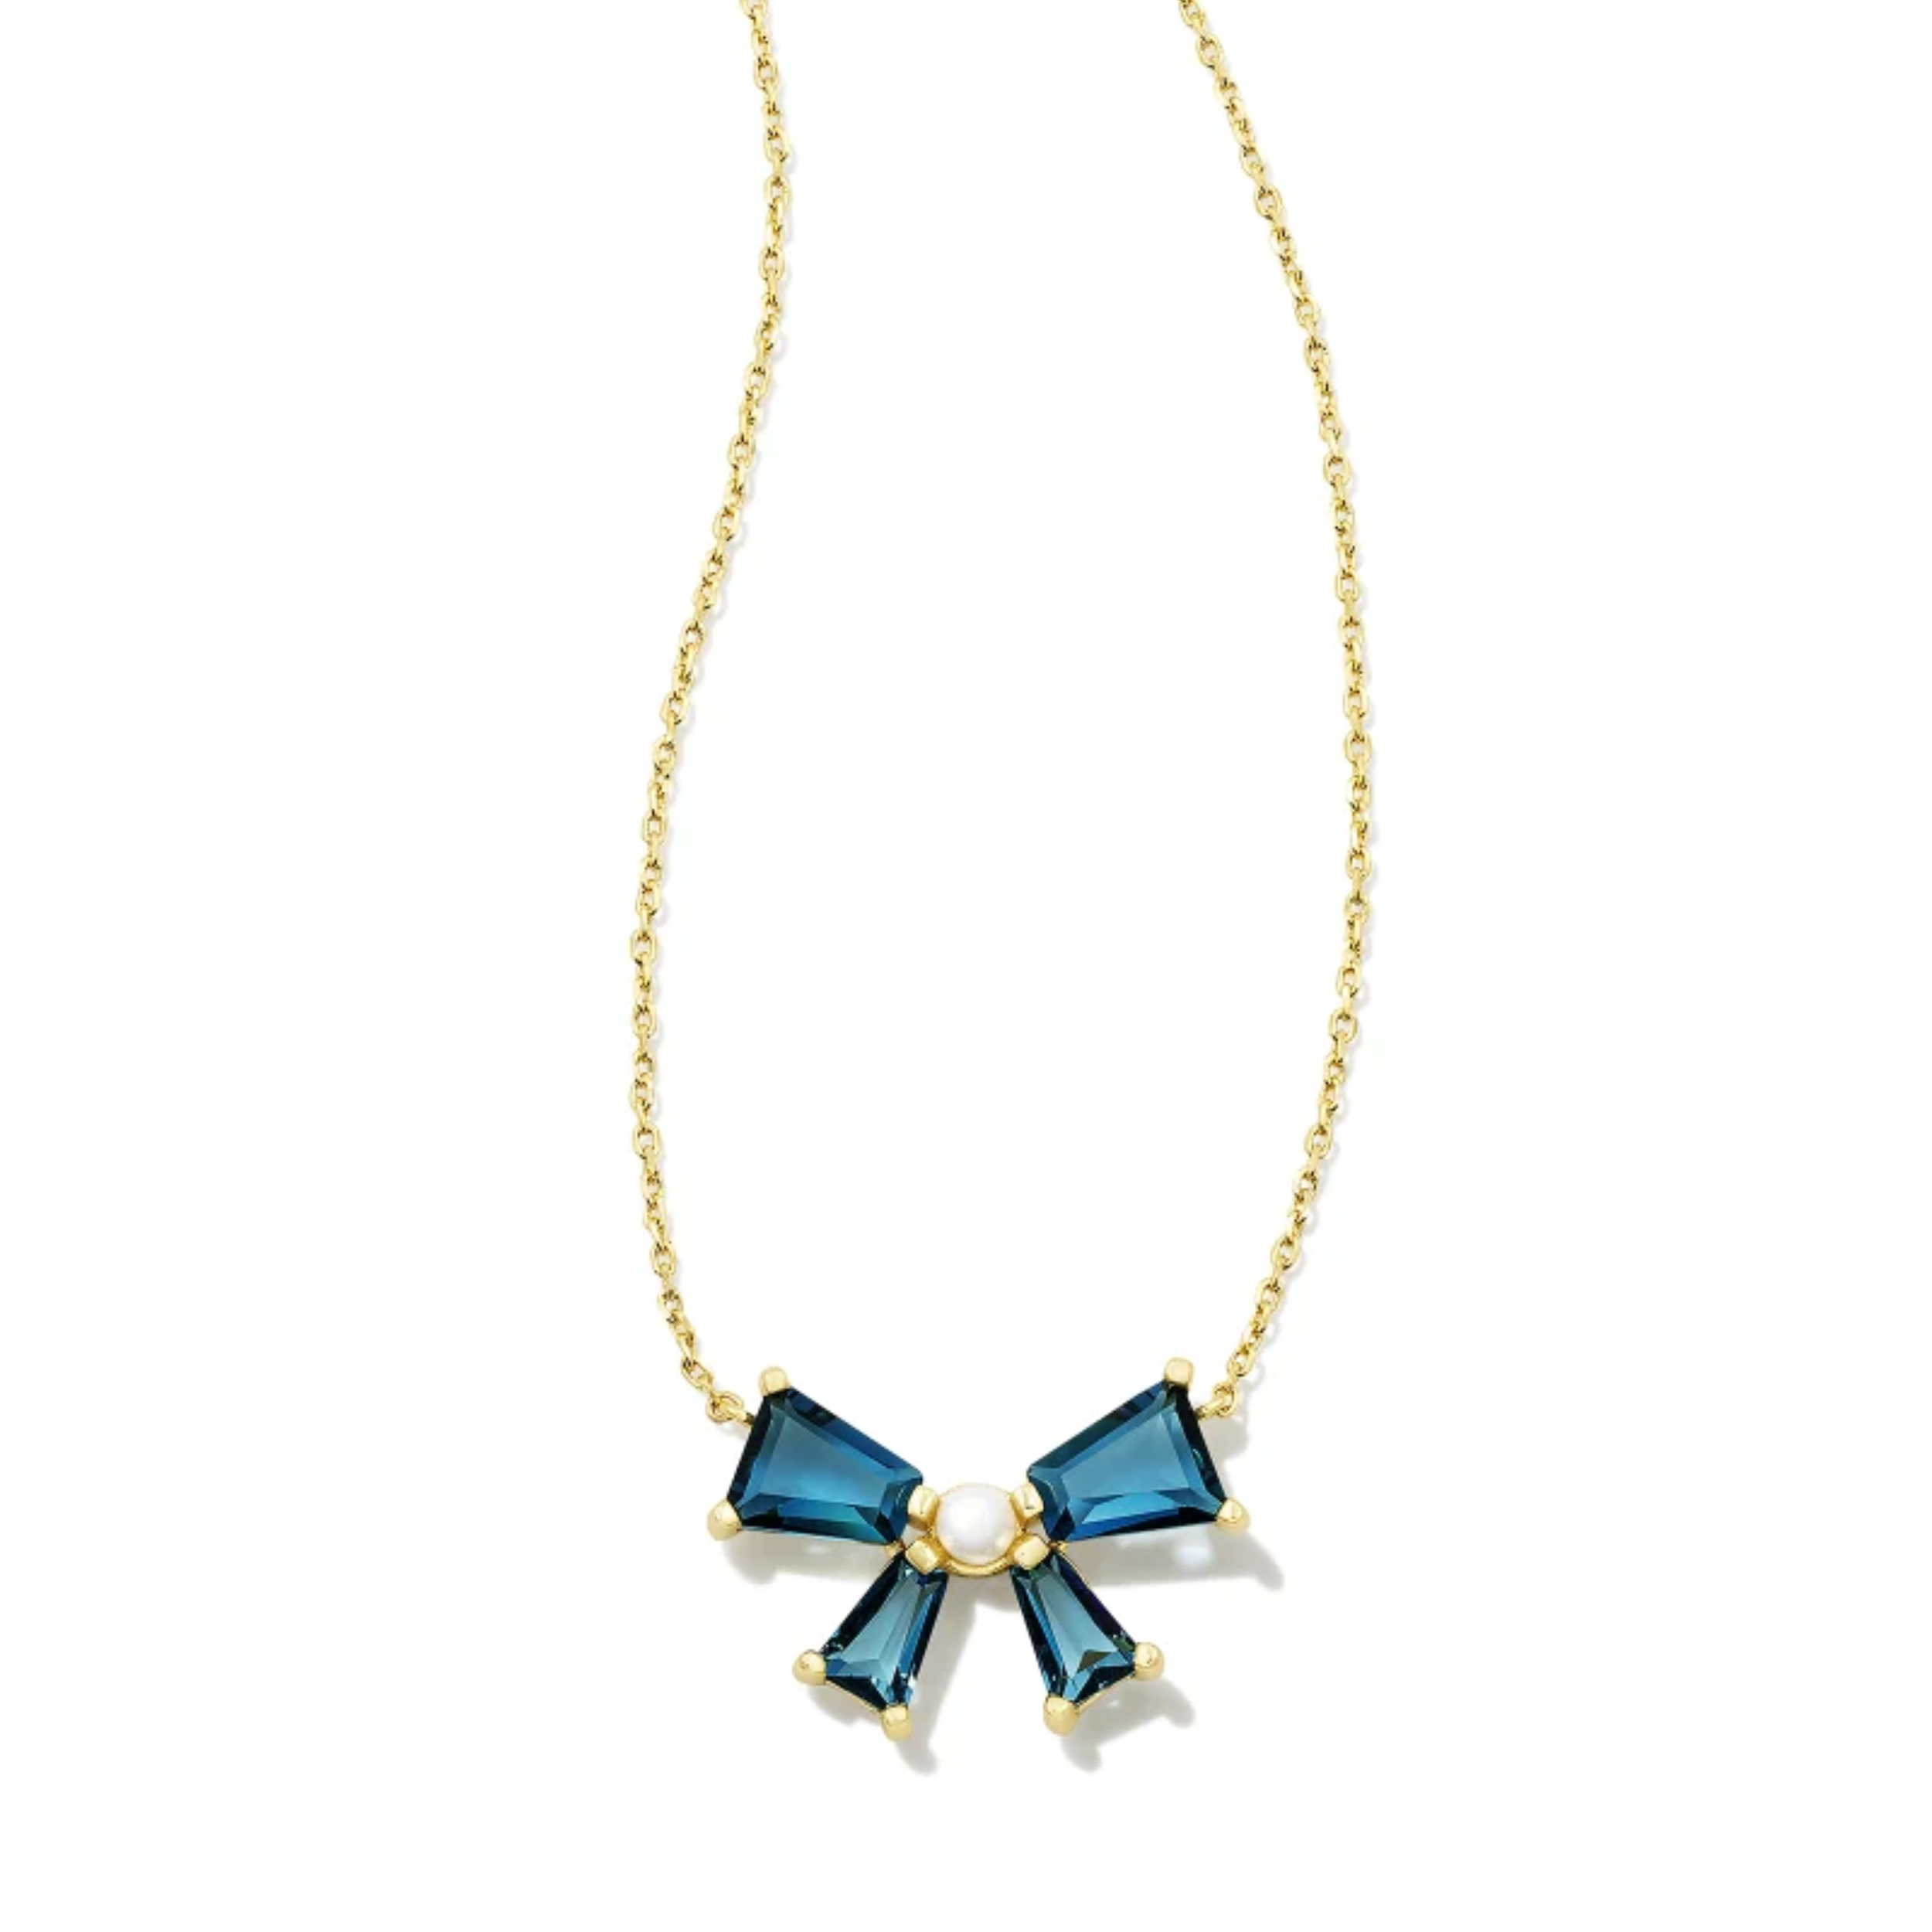 This Blair Gold Bow Pendant Necklace in teal Mix by Kendra Scott is pictured on a white background.